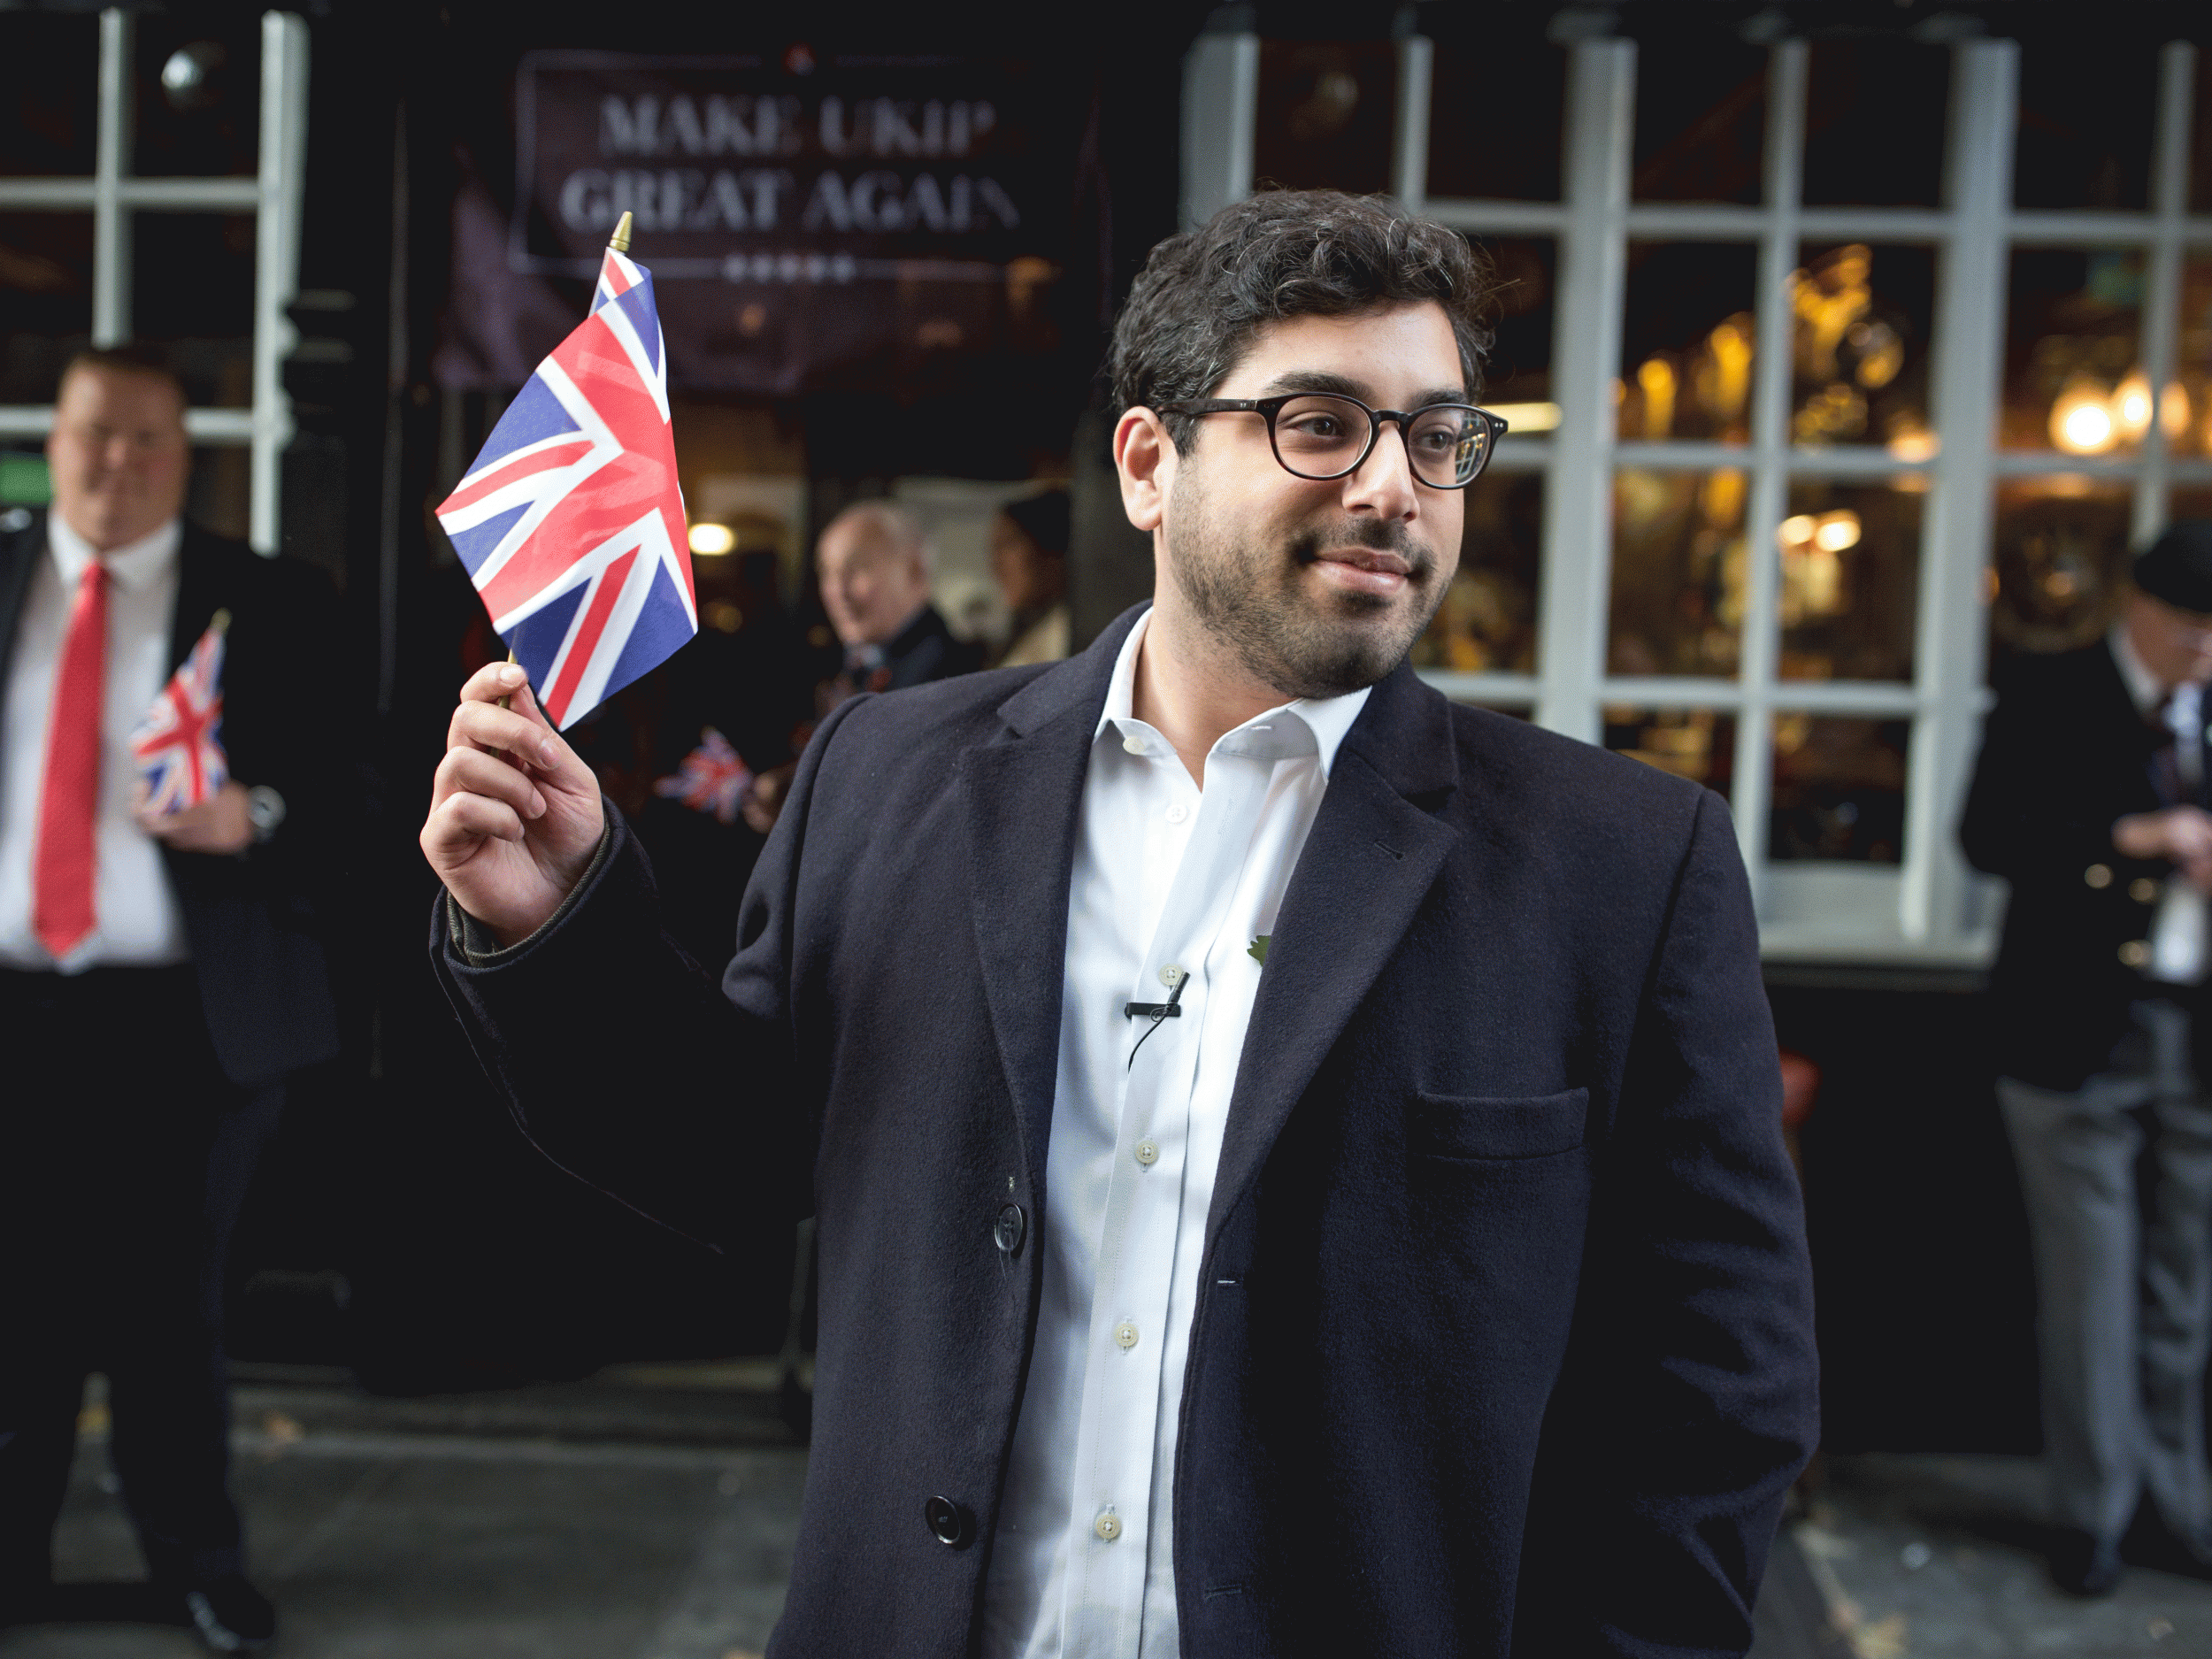 Kassam challenged Ukip's November 2016 leadership election before dropping out of the race at the end of October